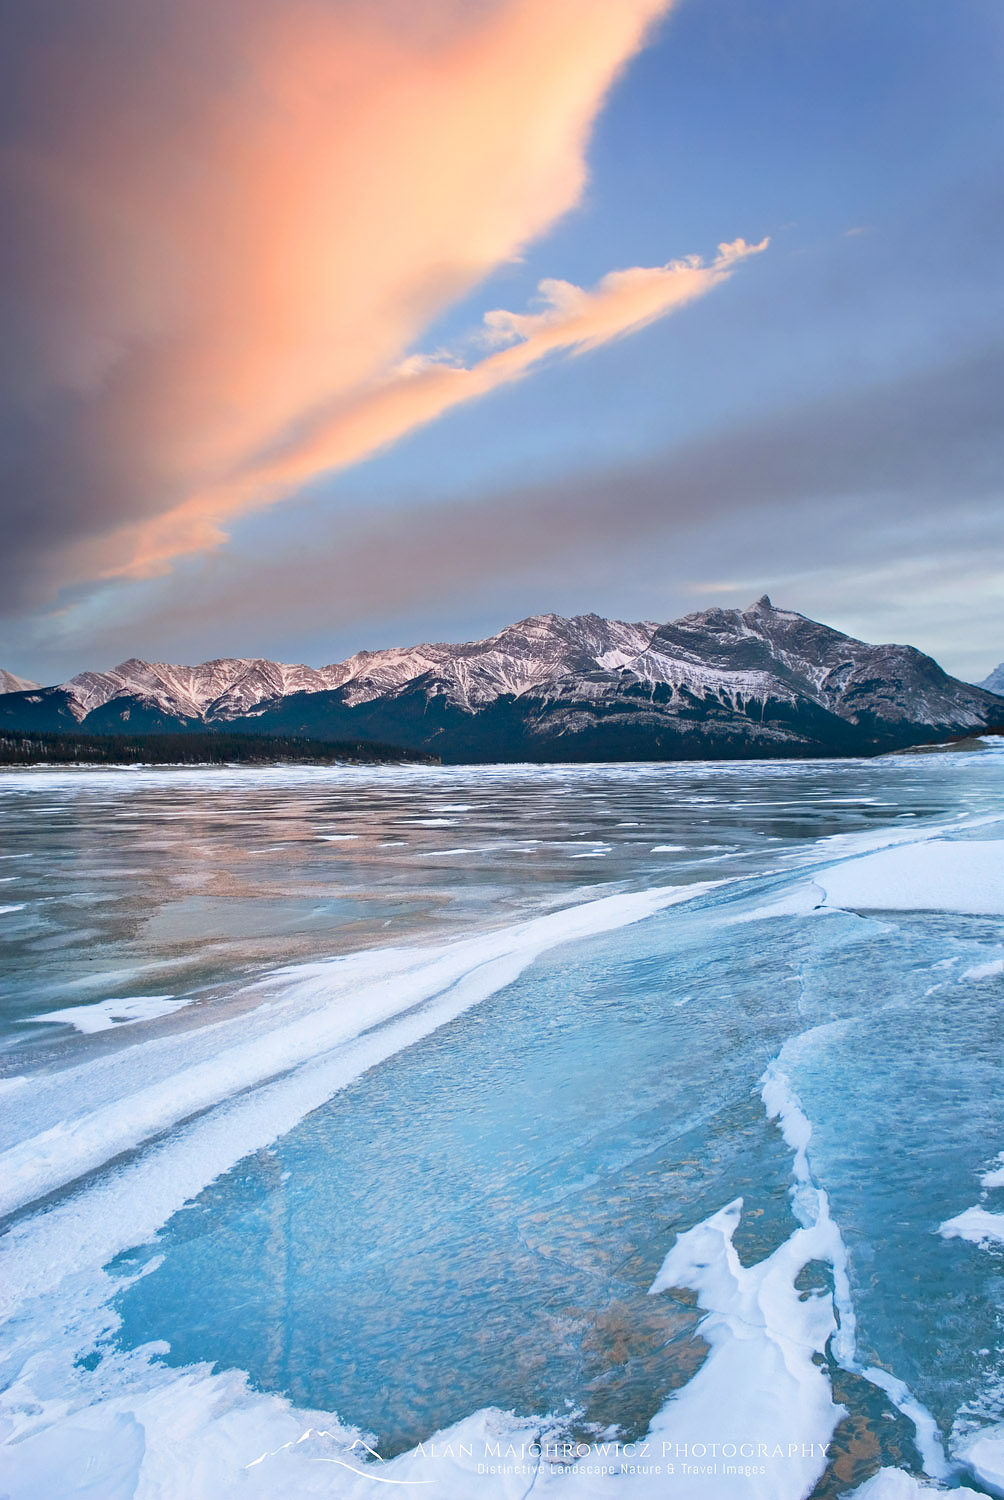 Clouds glowing in a winter sunset over the wind polished ice of Abraham Lake, Alberta Canada #43562